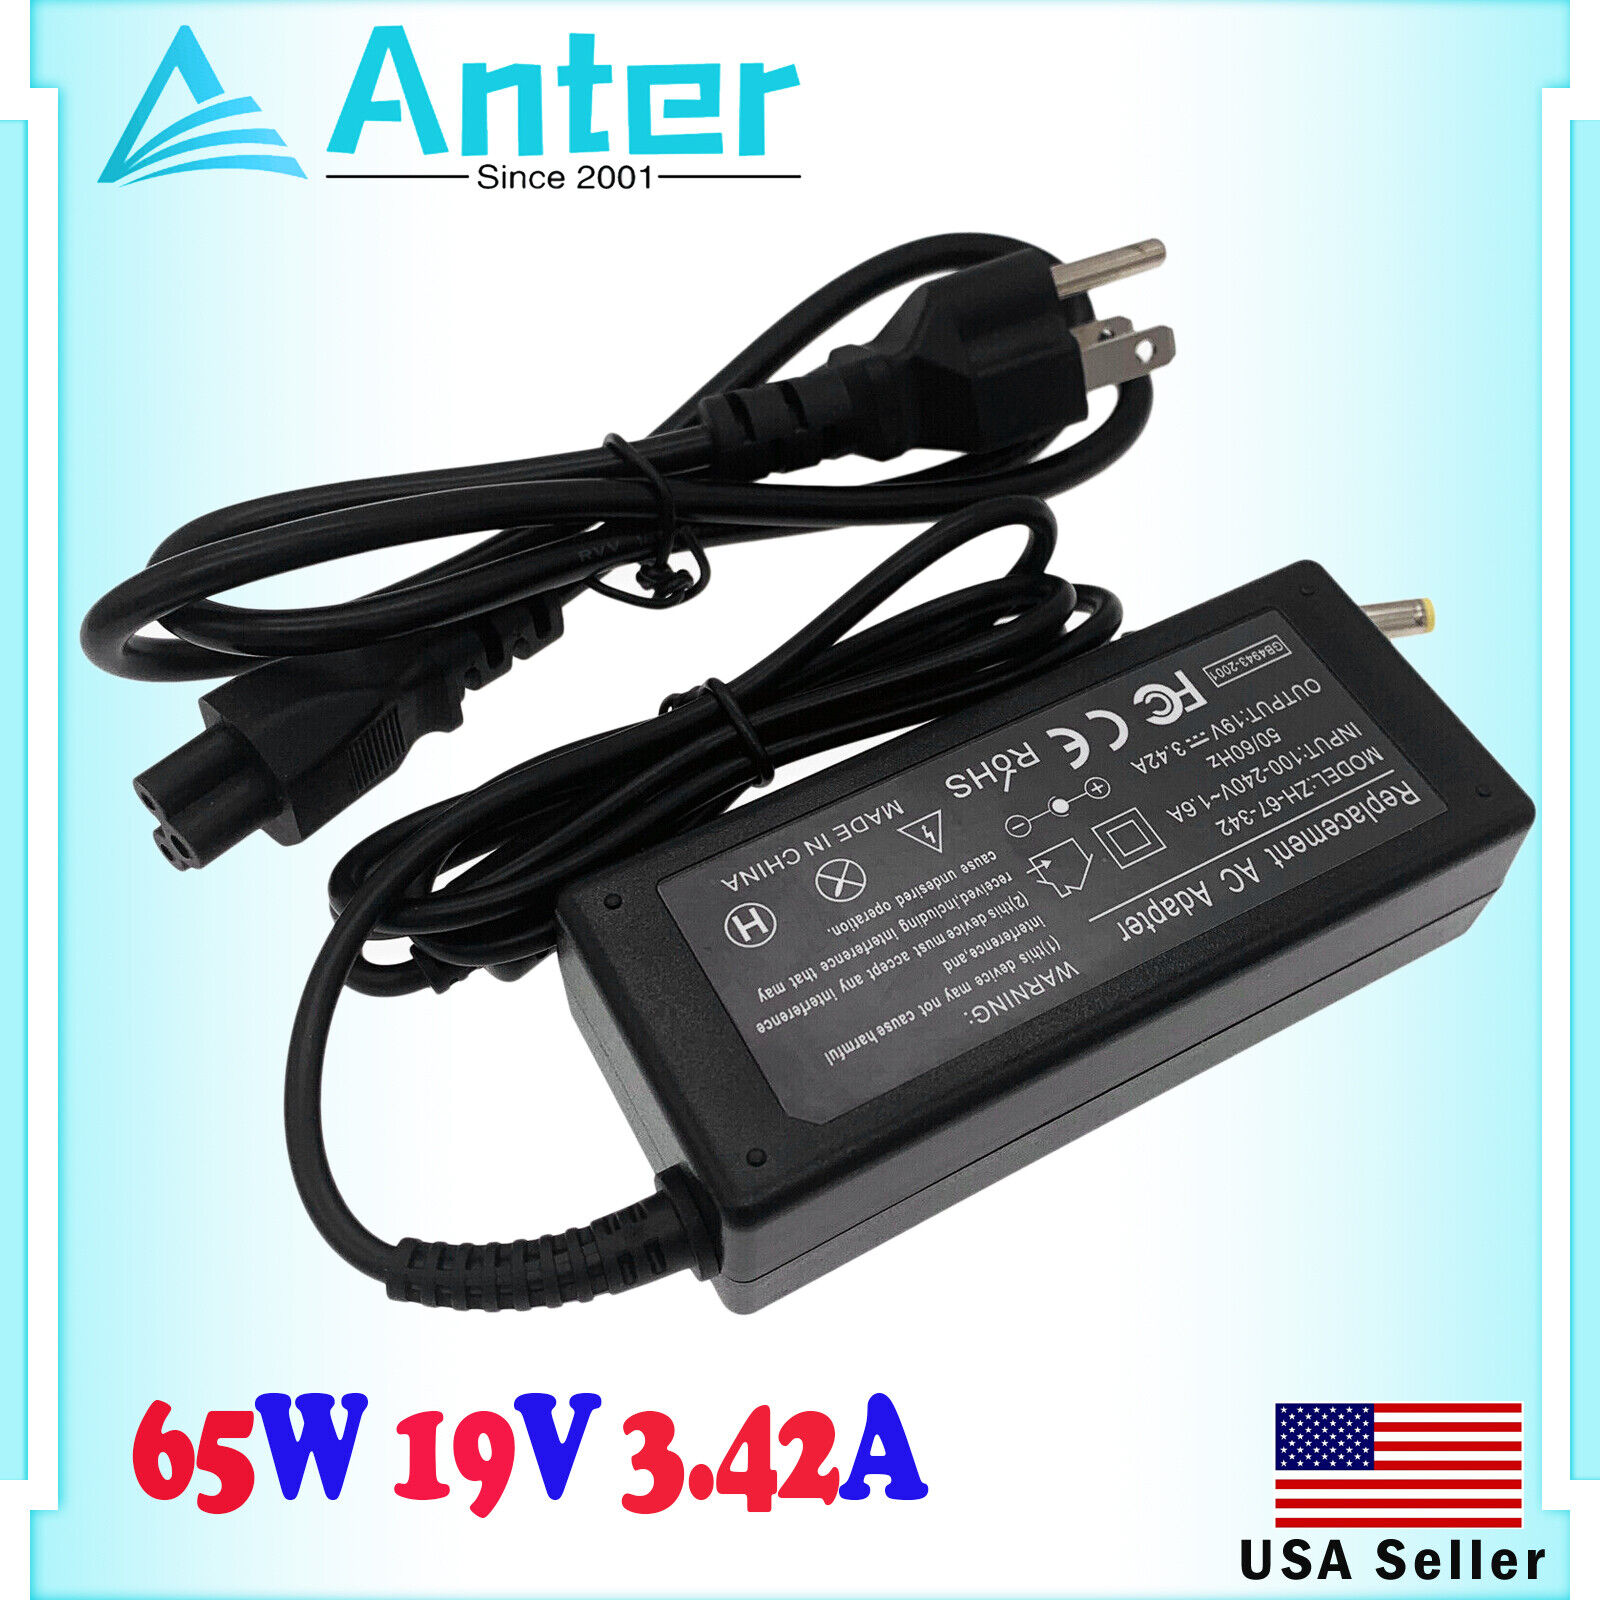 New AC Adapter For Gateway MS2274, MS2285, NV5214U Laptop Charger Power Cord